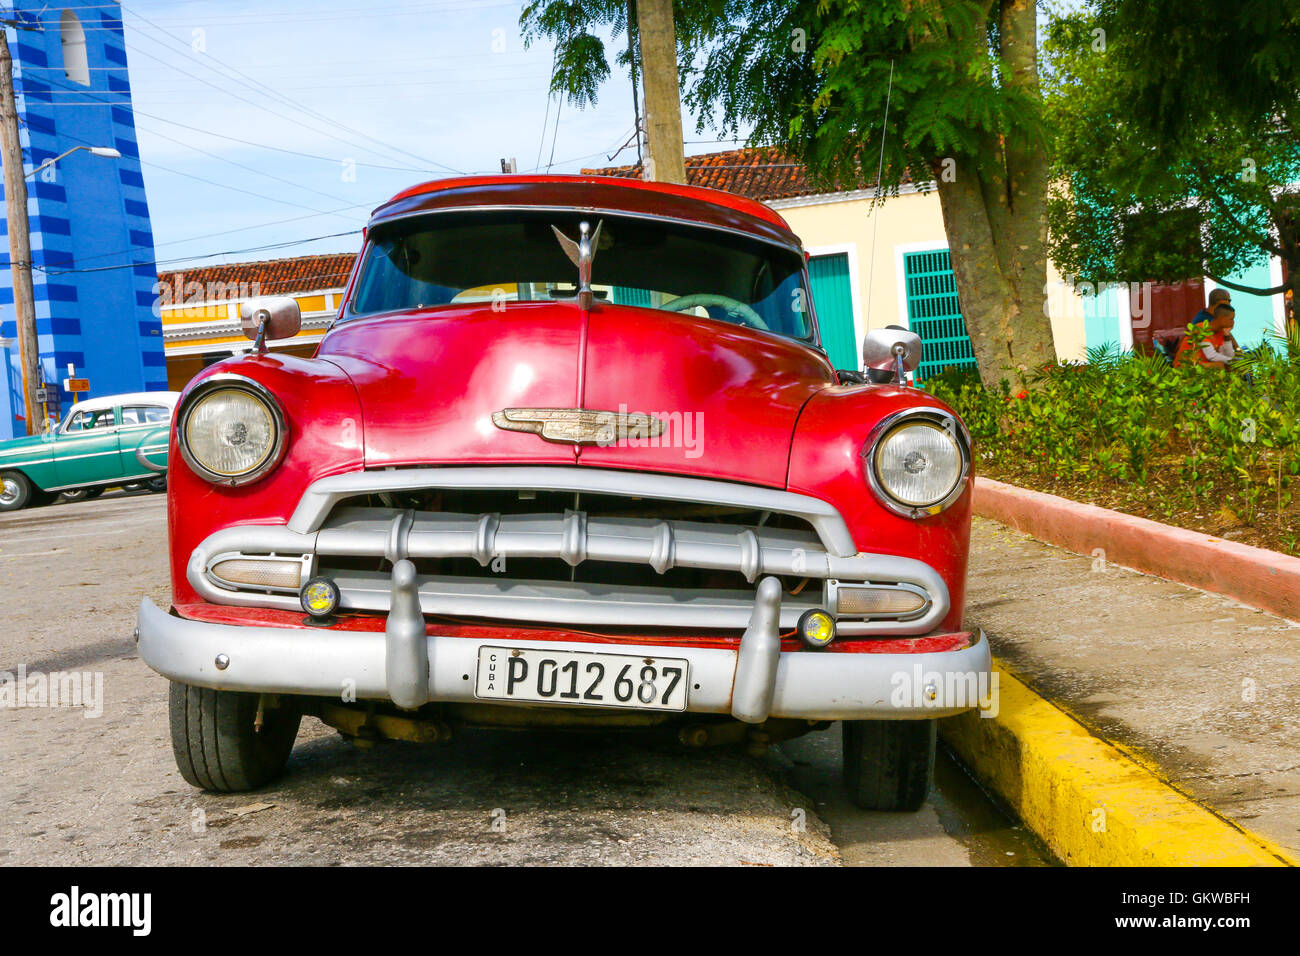 [Editorial Use Only] An old American Chevrolet Car with a custom plastic grill parked in a street in Sancti Spiritus, Cuba Stock Photo